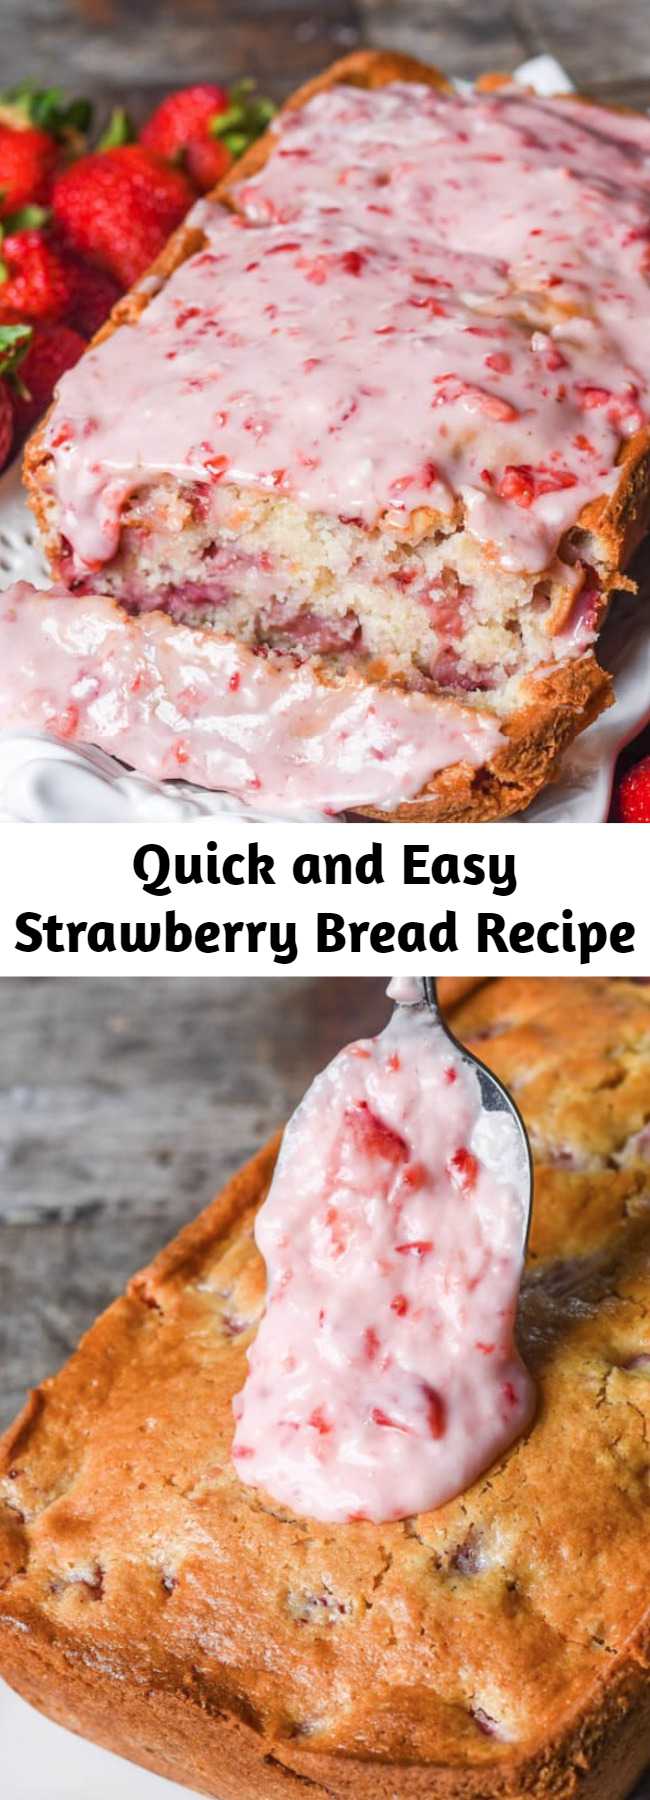 Quick and Easy Strawberry Bread Recipe - Try this fresh strawberry bread with melt-in-your-mouth strawberry glaze. This quick bread recipe comes together in just 10 minutes. If you love fruit breads, you'll also love our cherry bread!